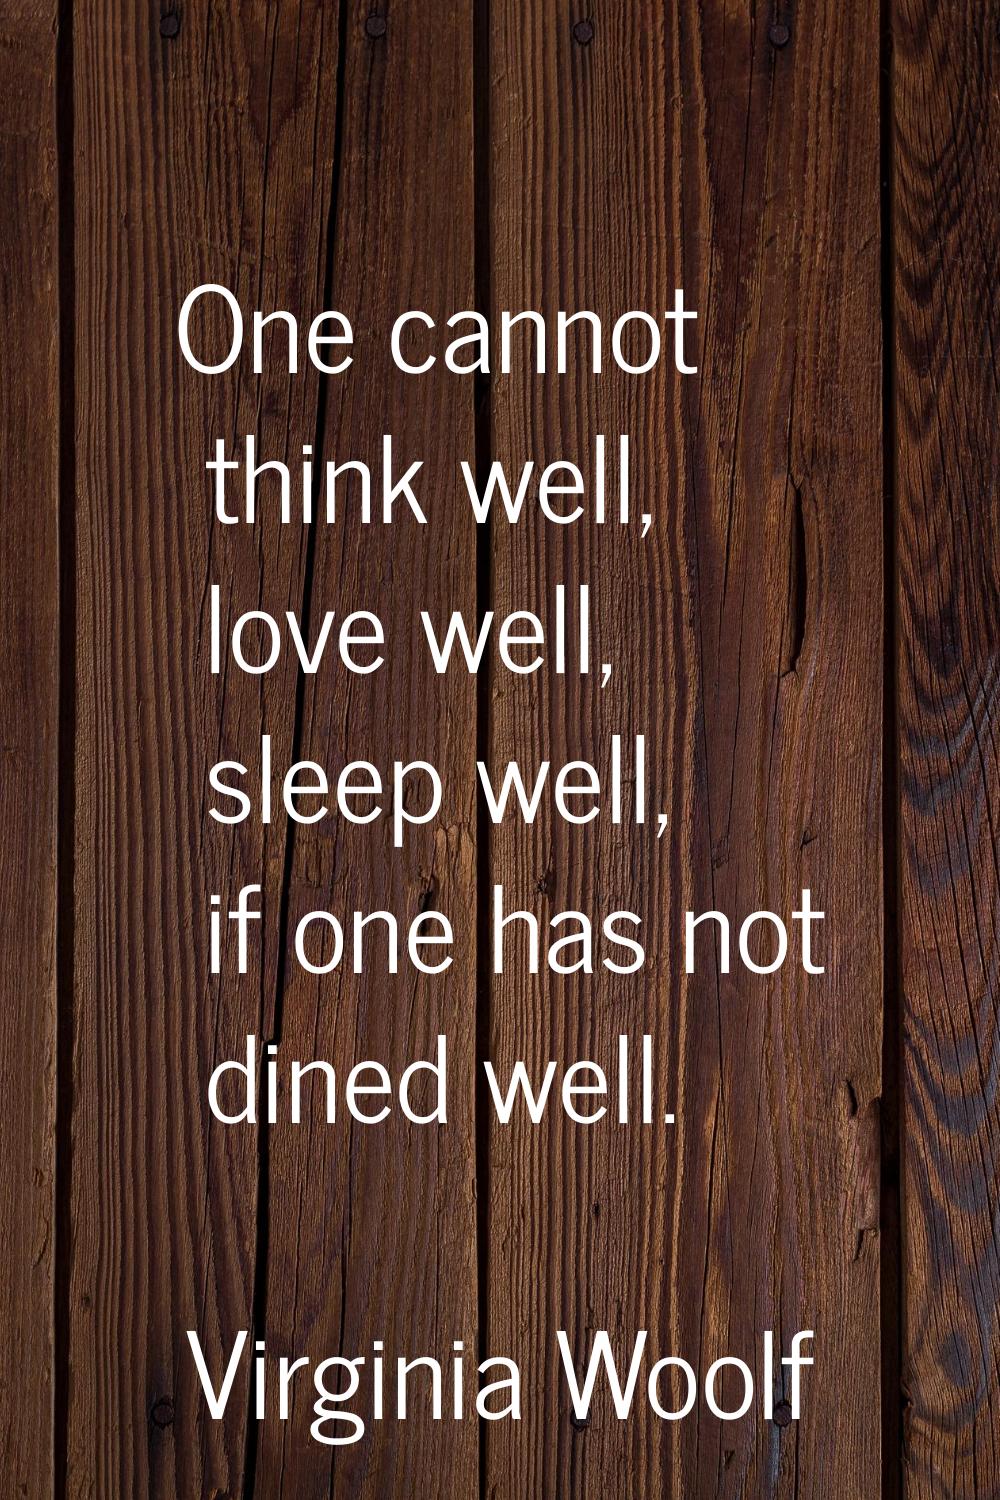 One cannot think well, love well, sleep well, if one has not dined well.